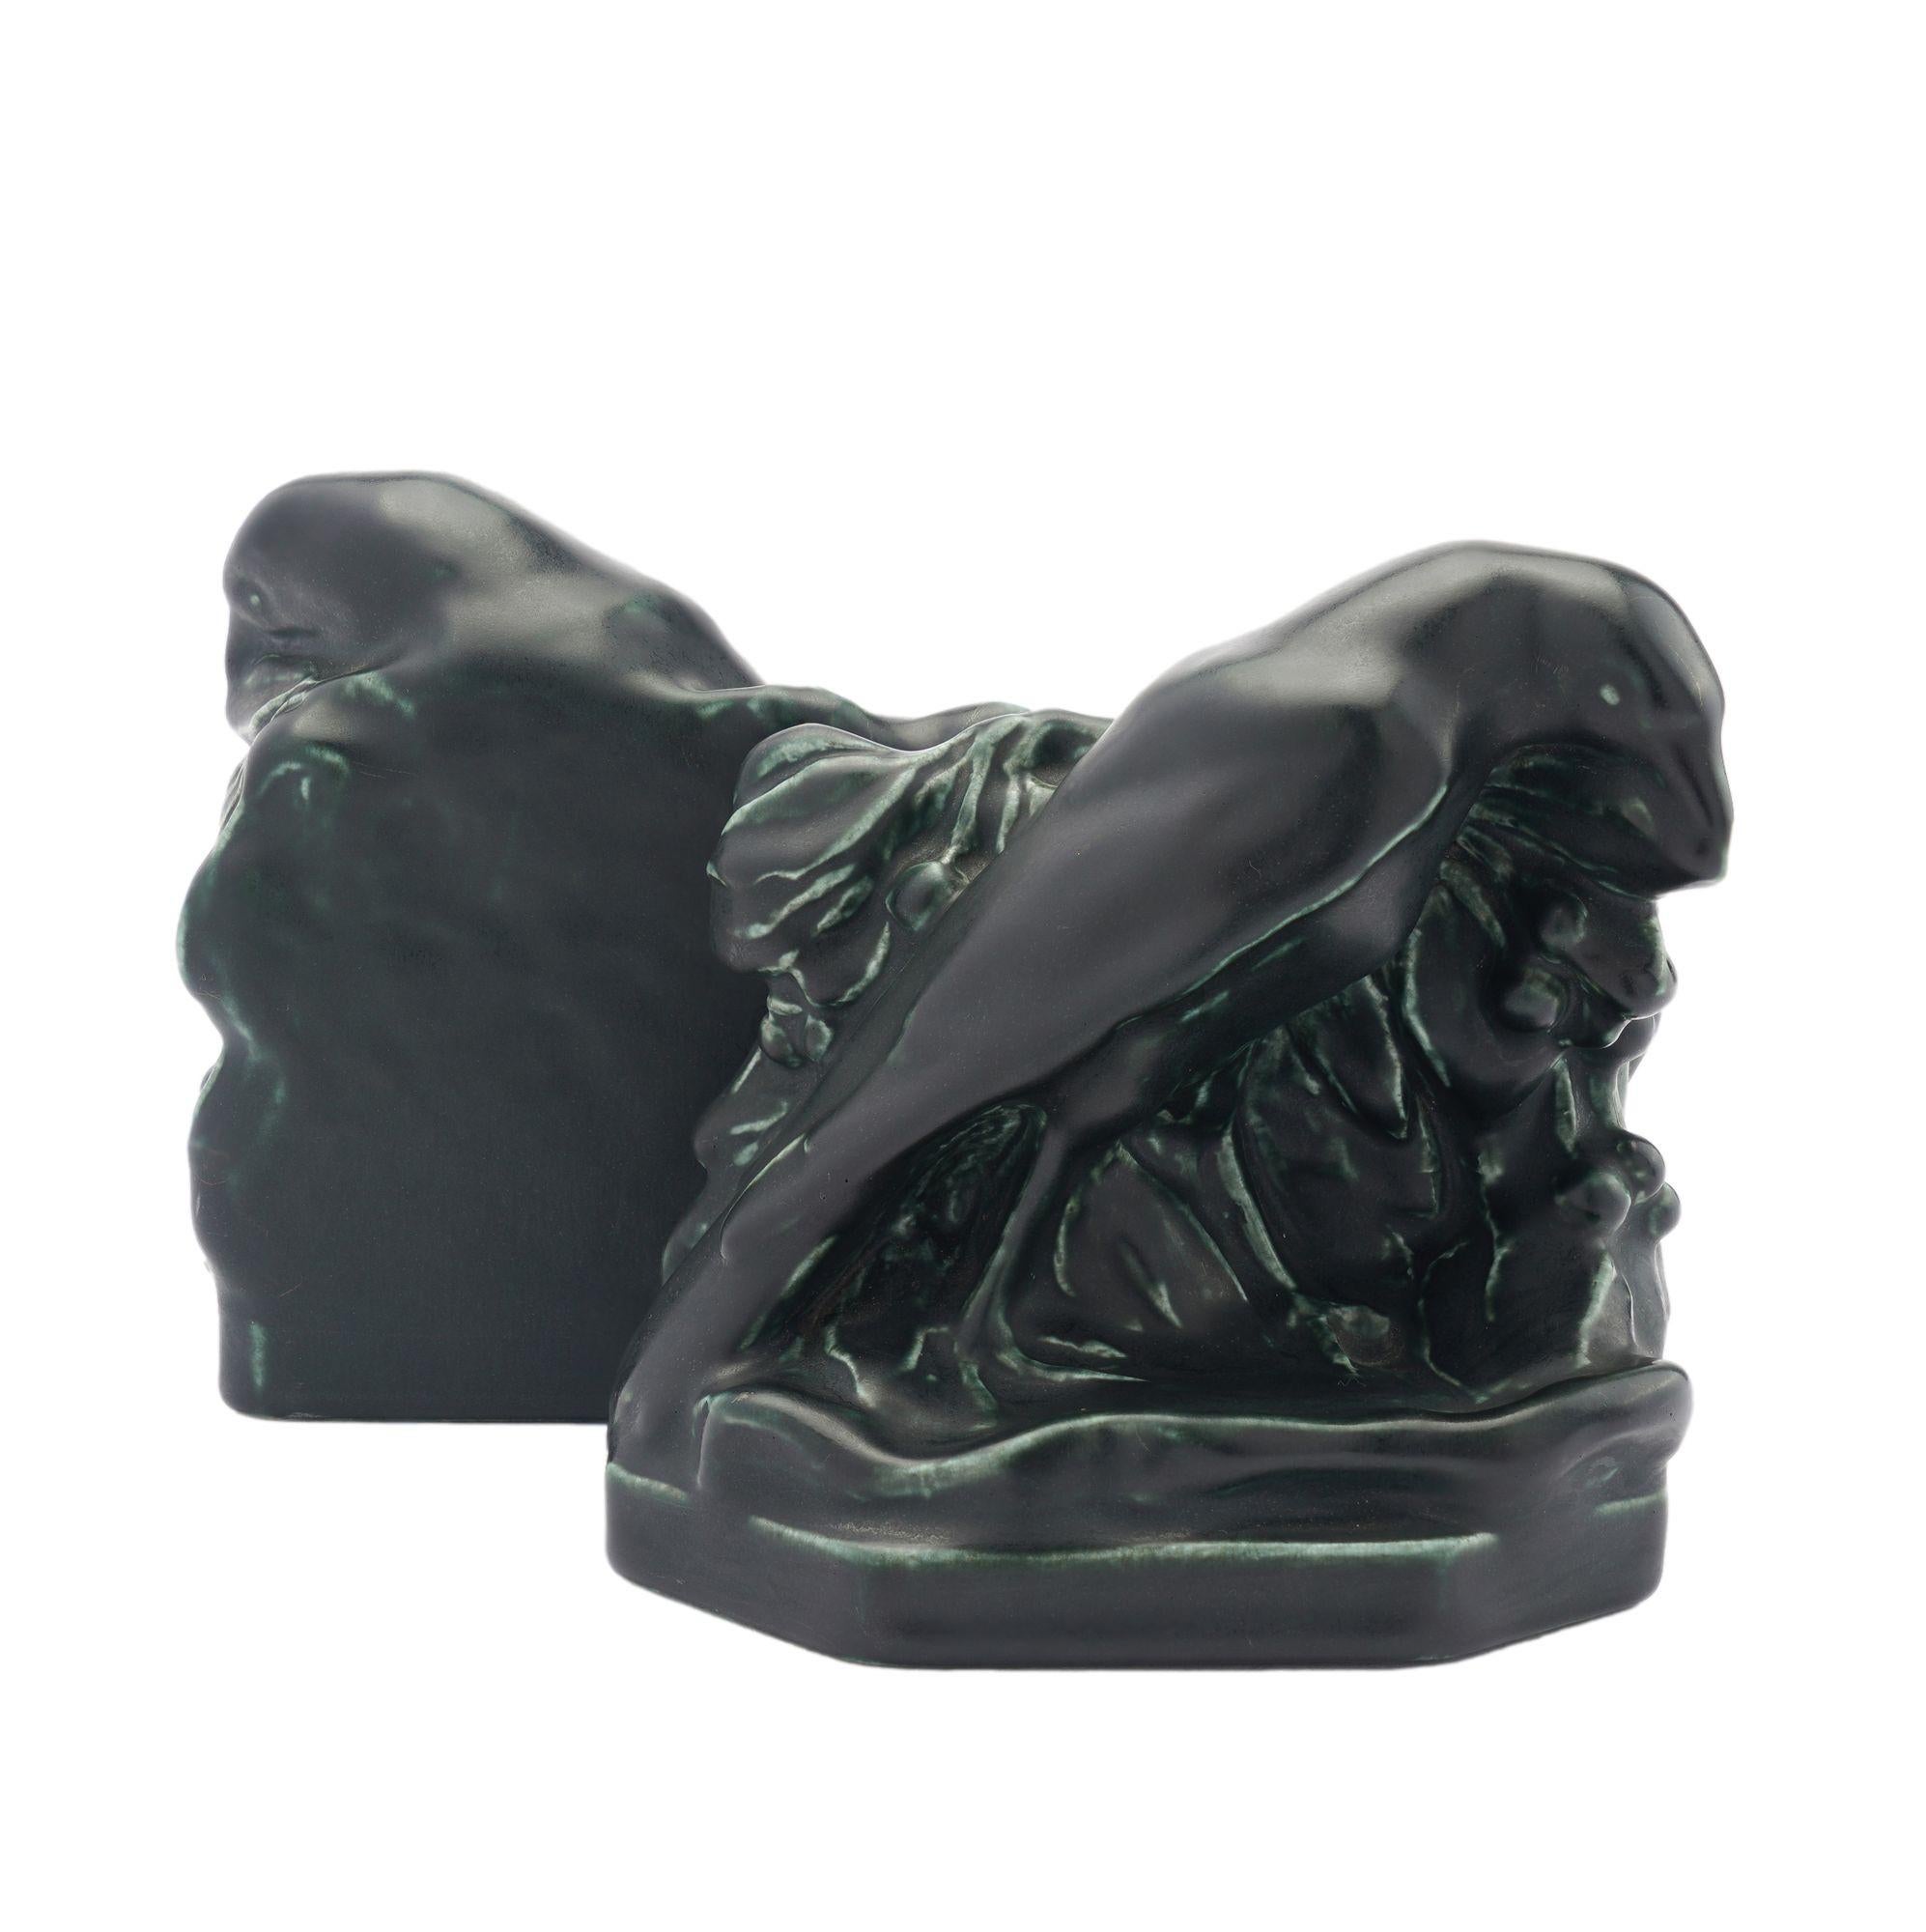 Ceramic Pair of raven bookends by Rookwood, 1929